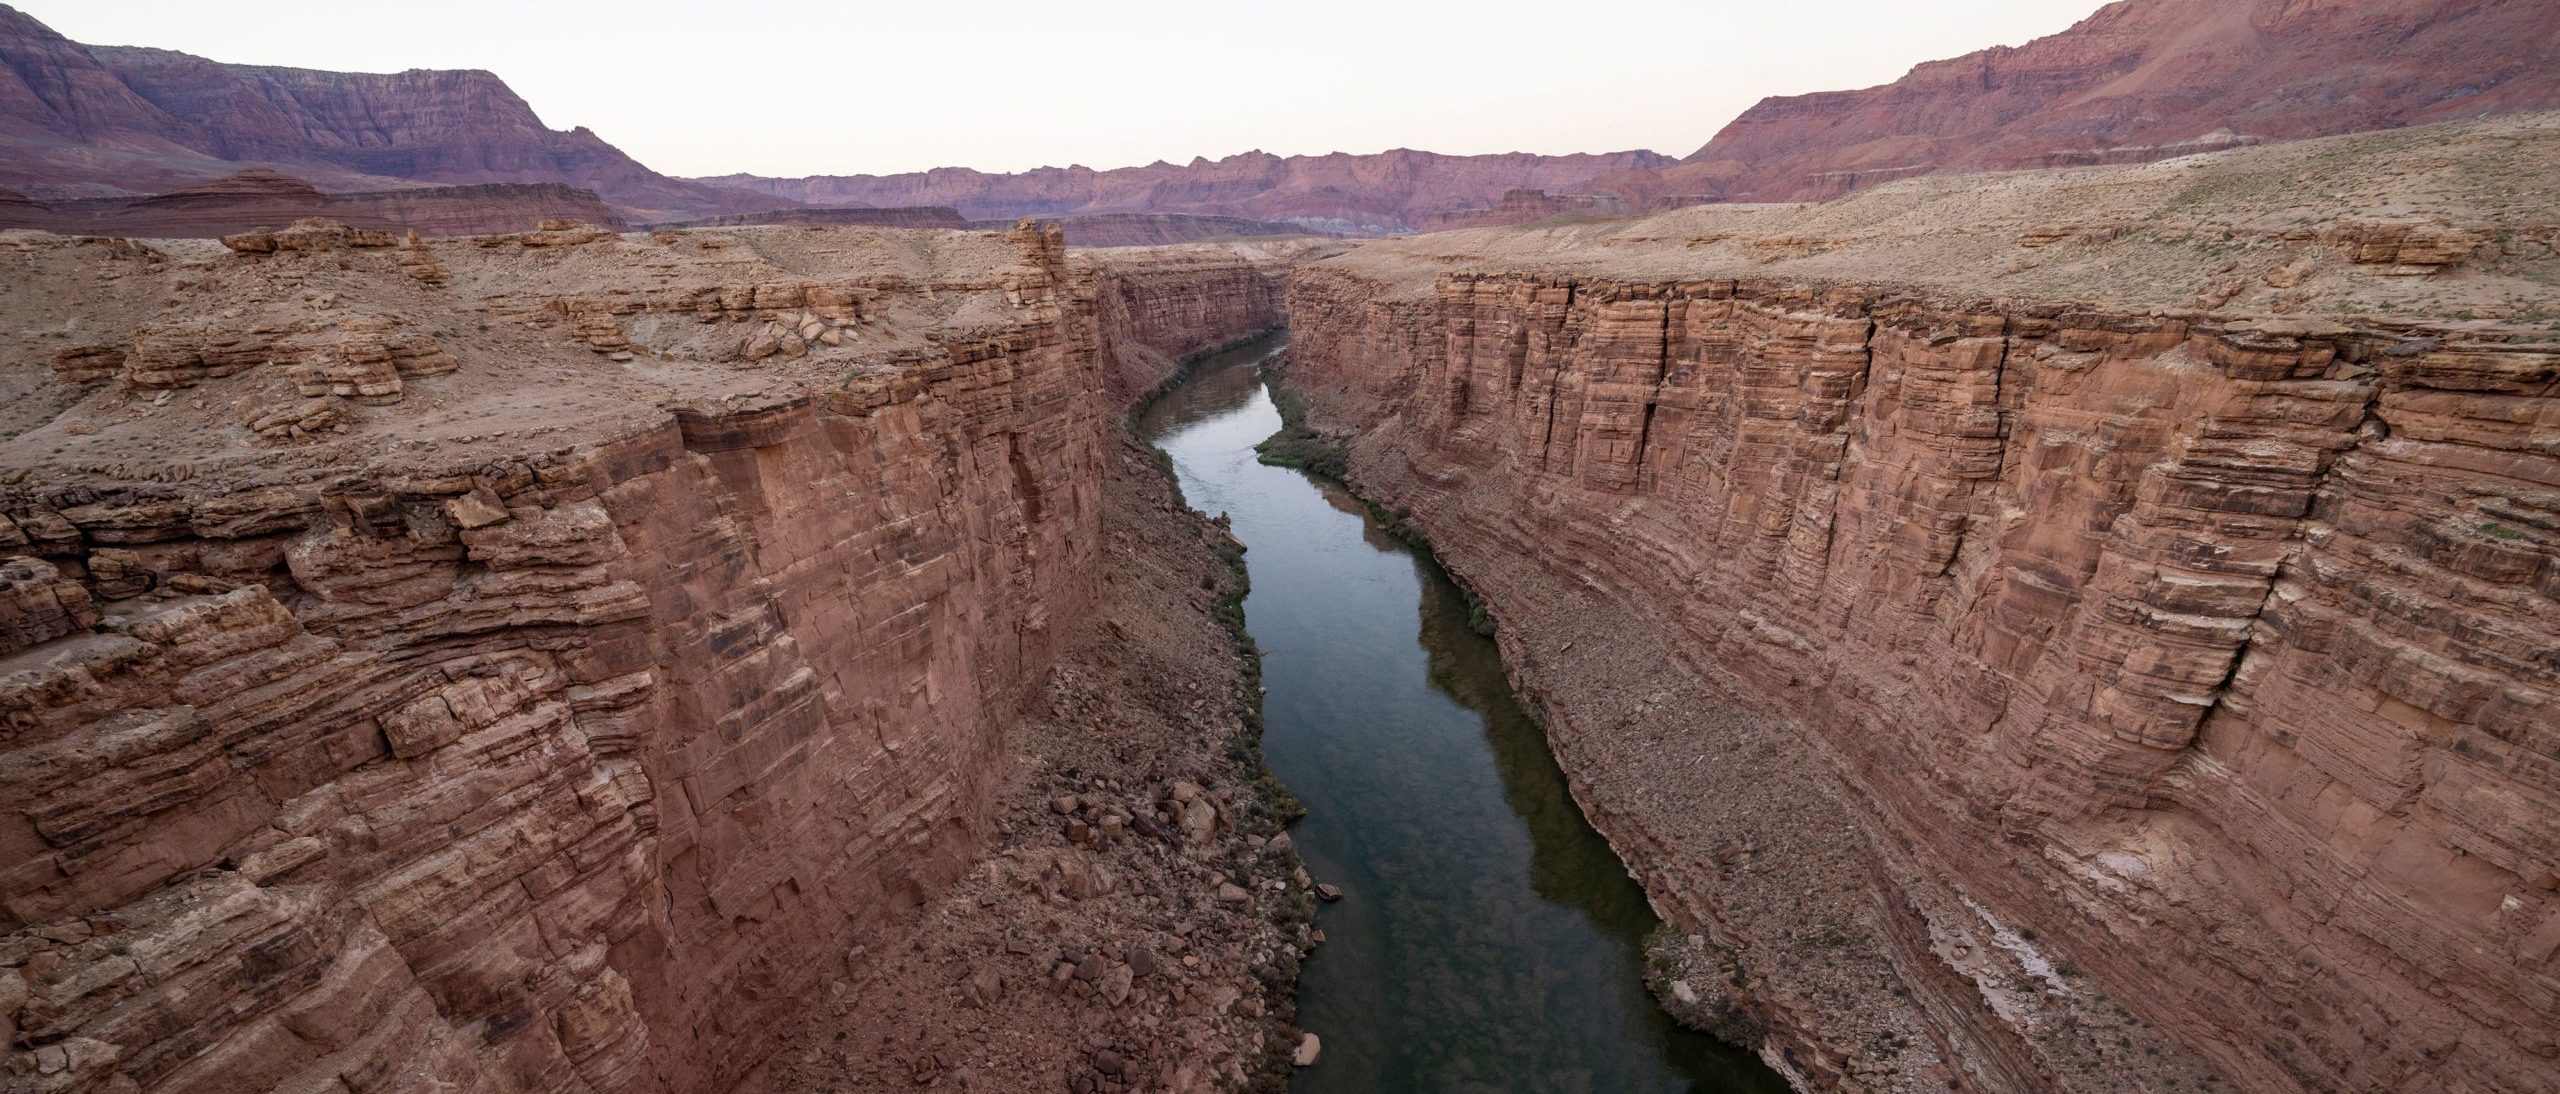 A view of the Colorado River from the Navajo Bridge in Marble Canyon, Arizona, August 31, 2022. - Amidst the drought and water shortages plaguing the country, last month the US government declared a water shortage on the Colorado River for the first time, triggering mandatory water consumption cuts for states in the Southwest, as climate change-fueled drought pushes the level in Lake Powell and Lake Mead to unprecedented lows. (Photo by Robyn Beck / AFP) 